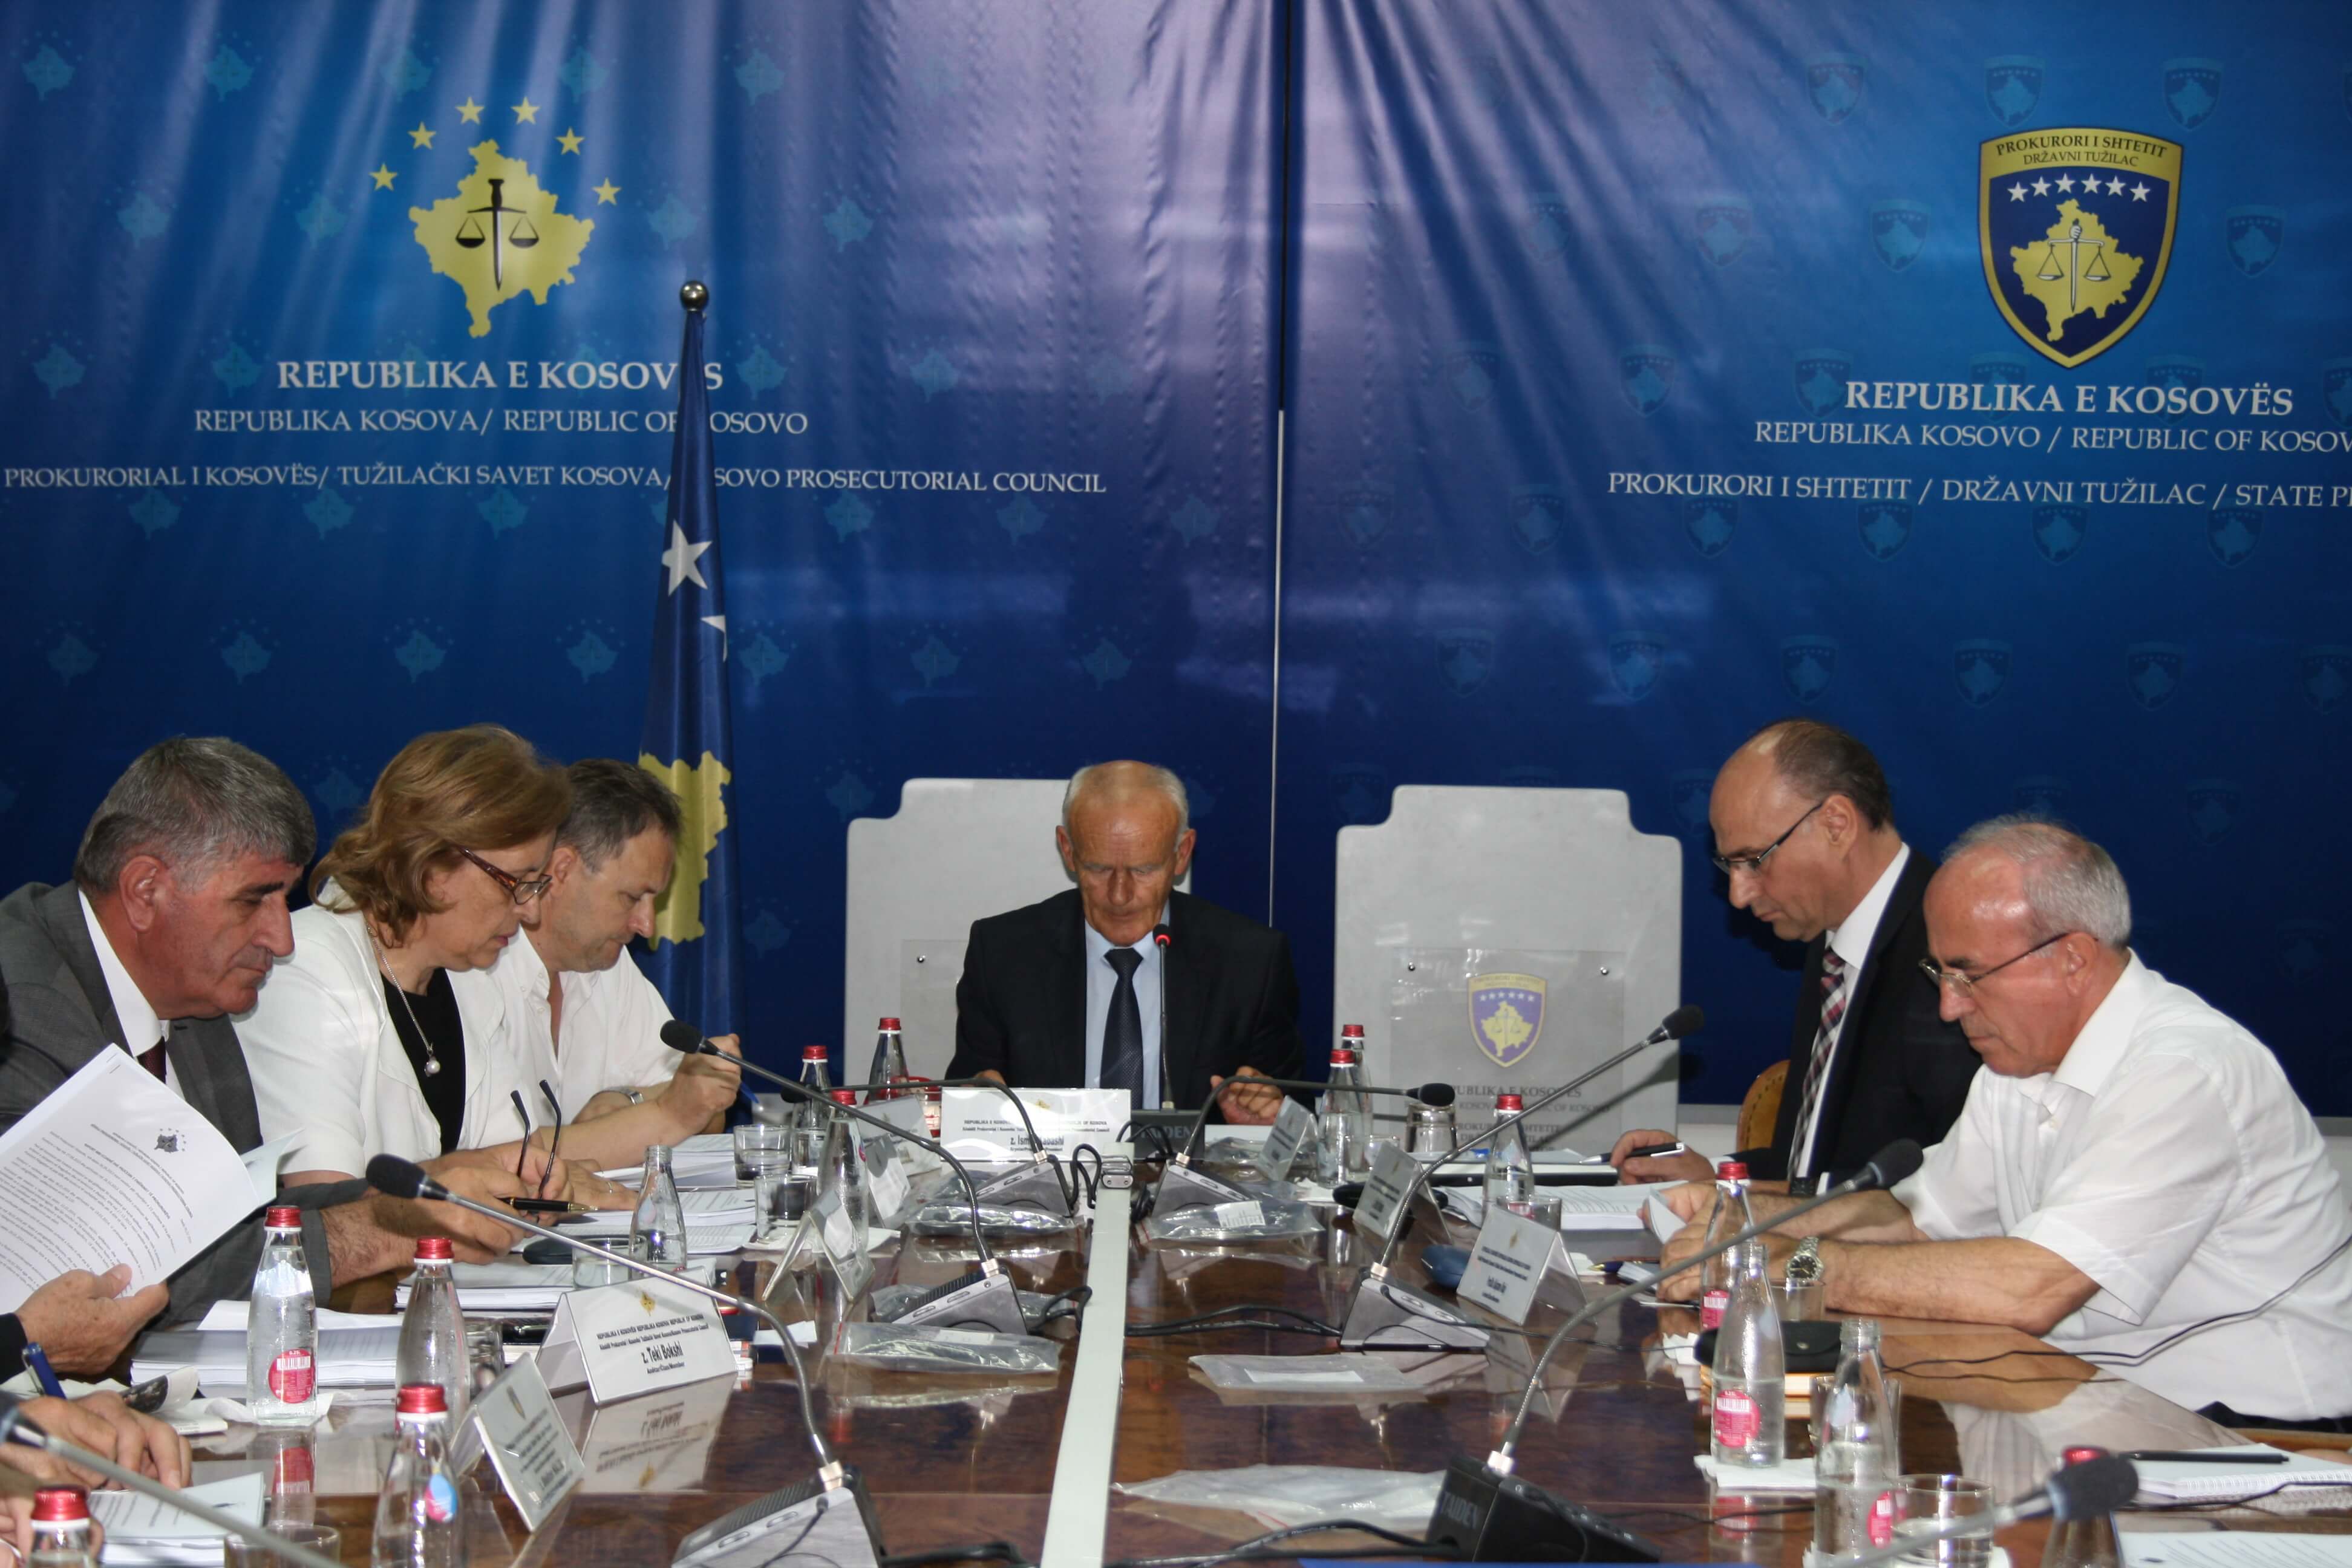 NEXT MEETING OF KOSOVO PROSECUTORIAL COUNCIL IS HELD